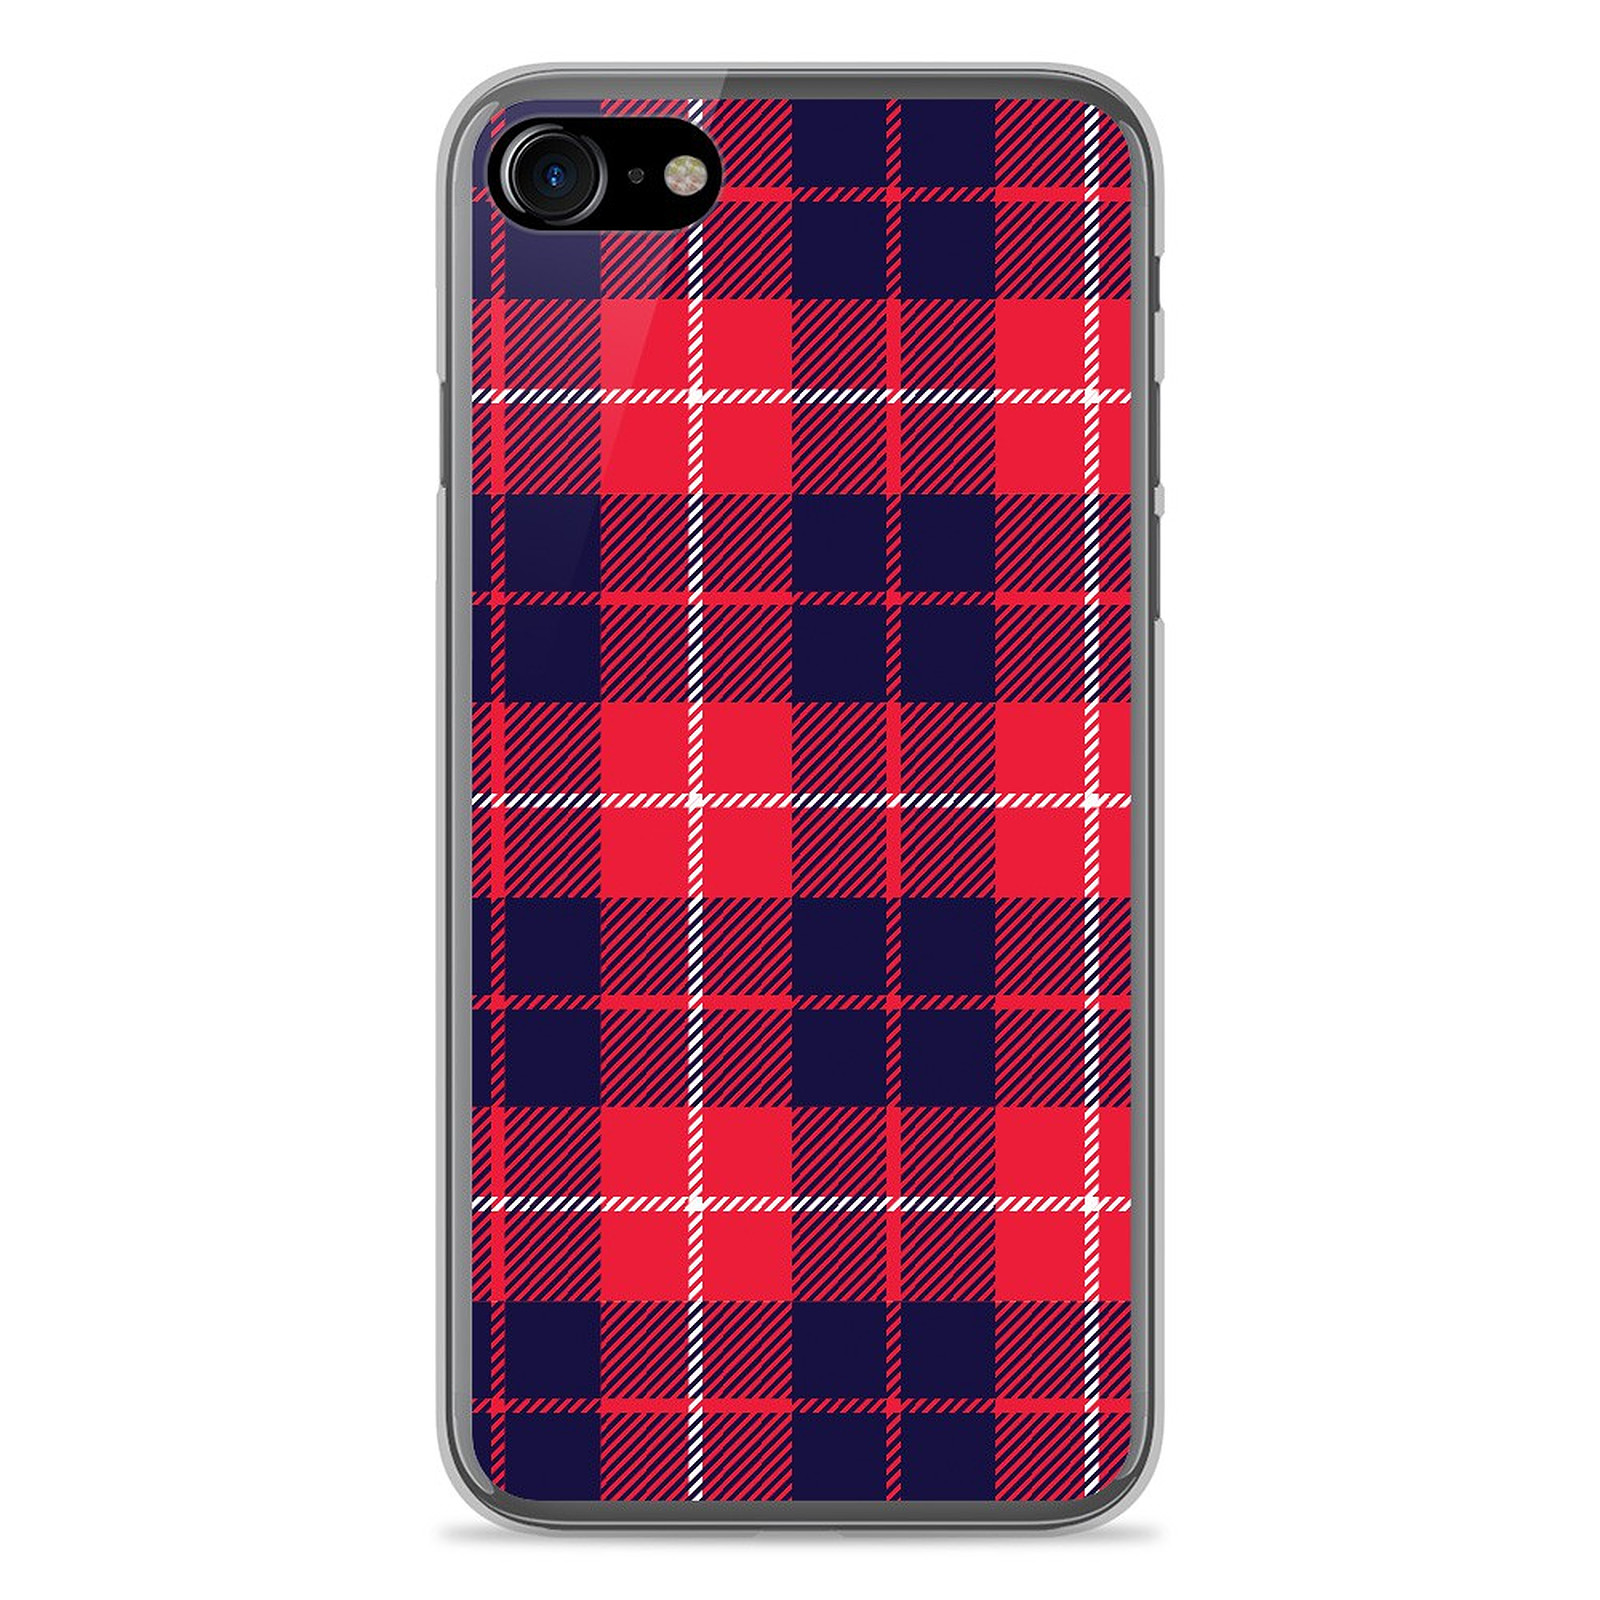 1001 Coques Coque silicone gel Apple IPhone 8 motif Tartan Rouge 2 - Coque telephone 1001Coques